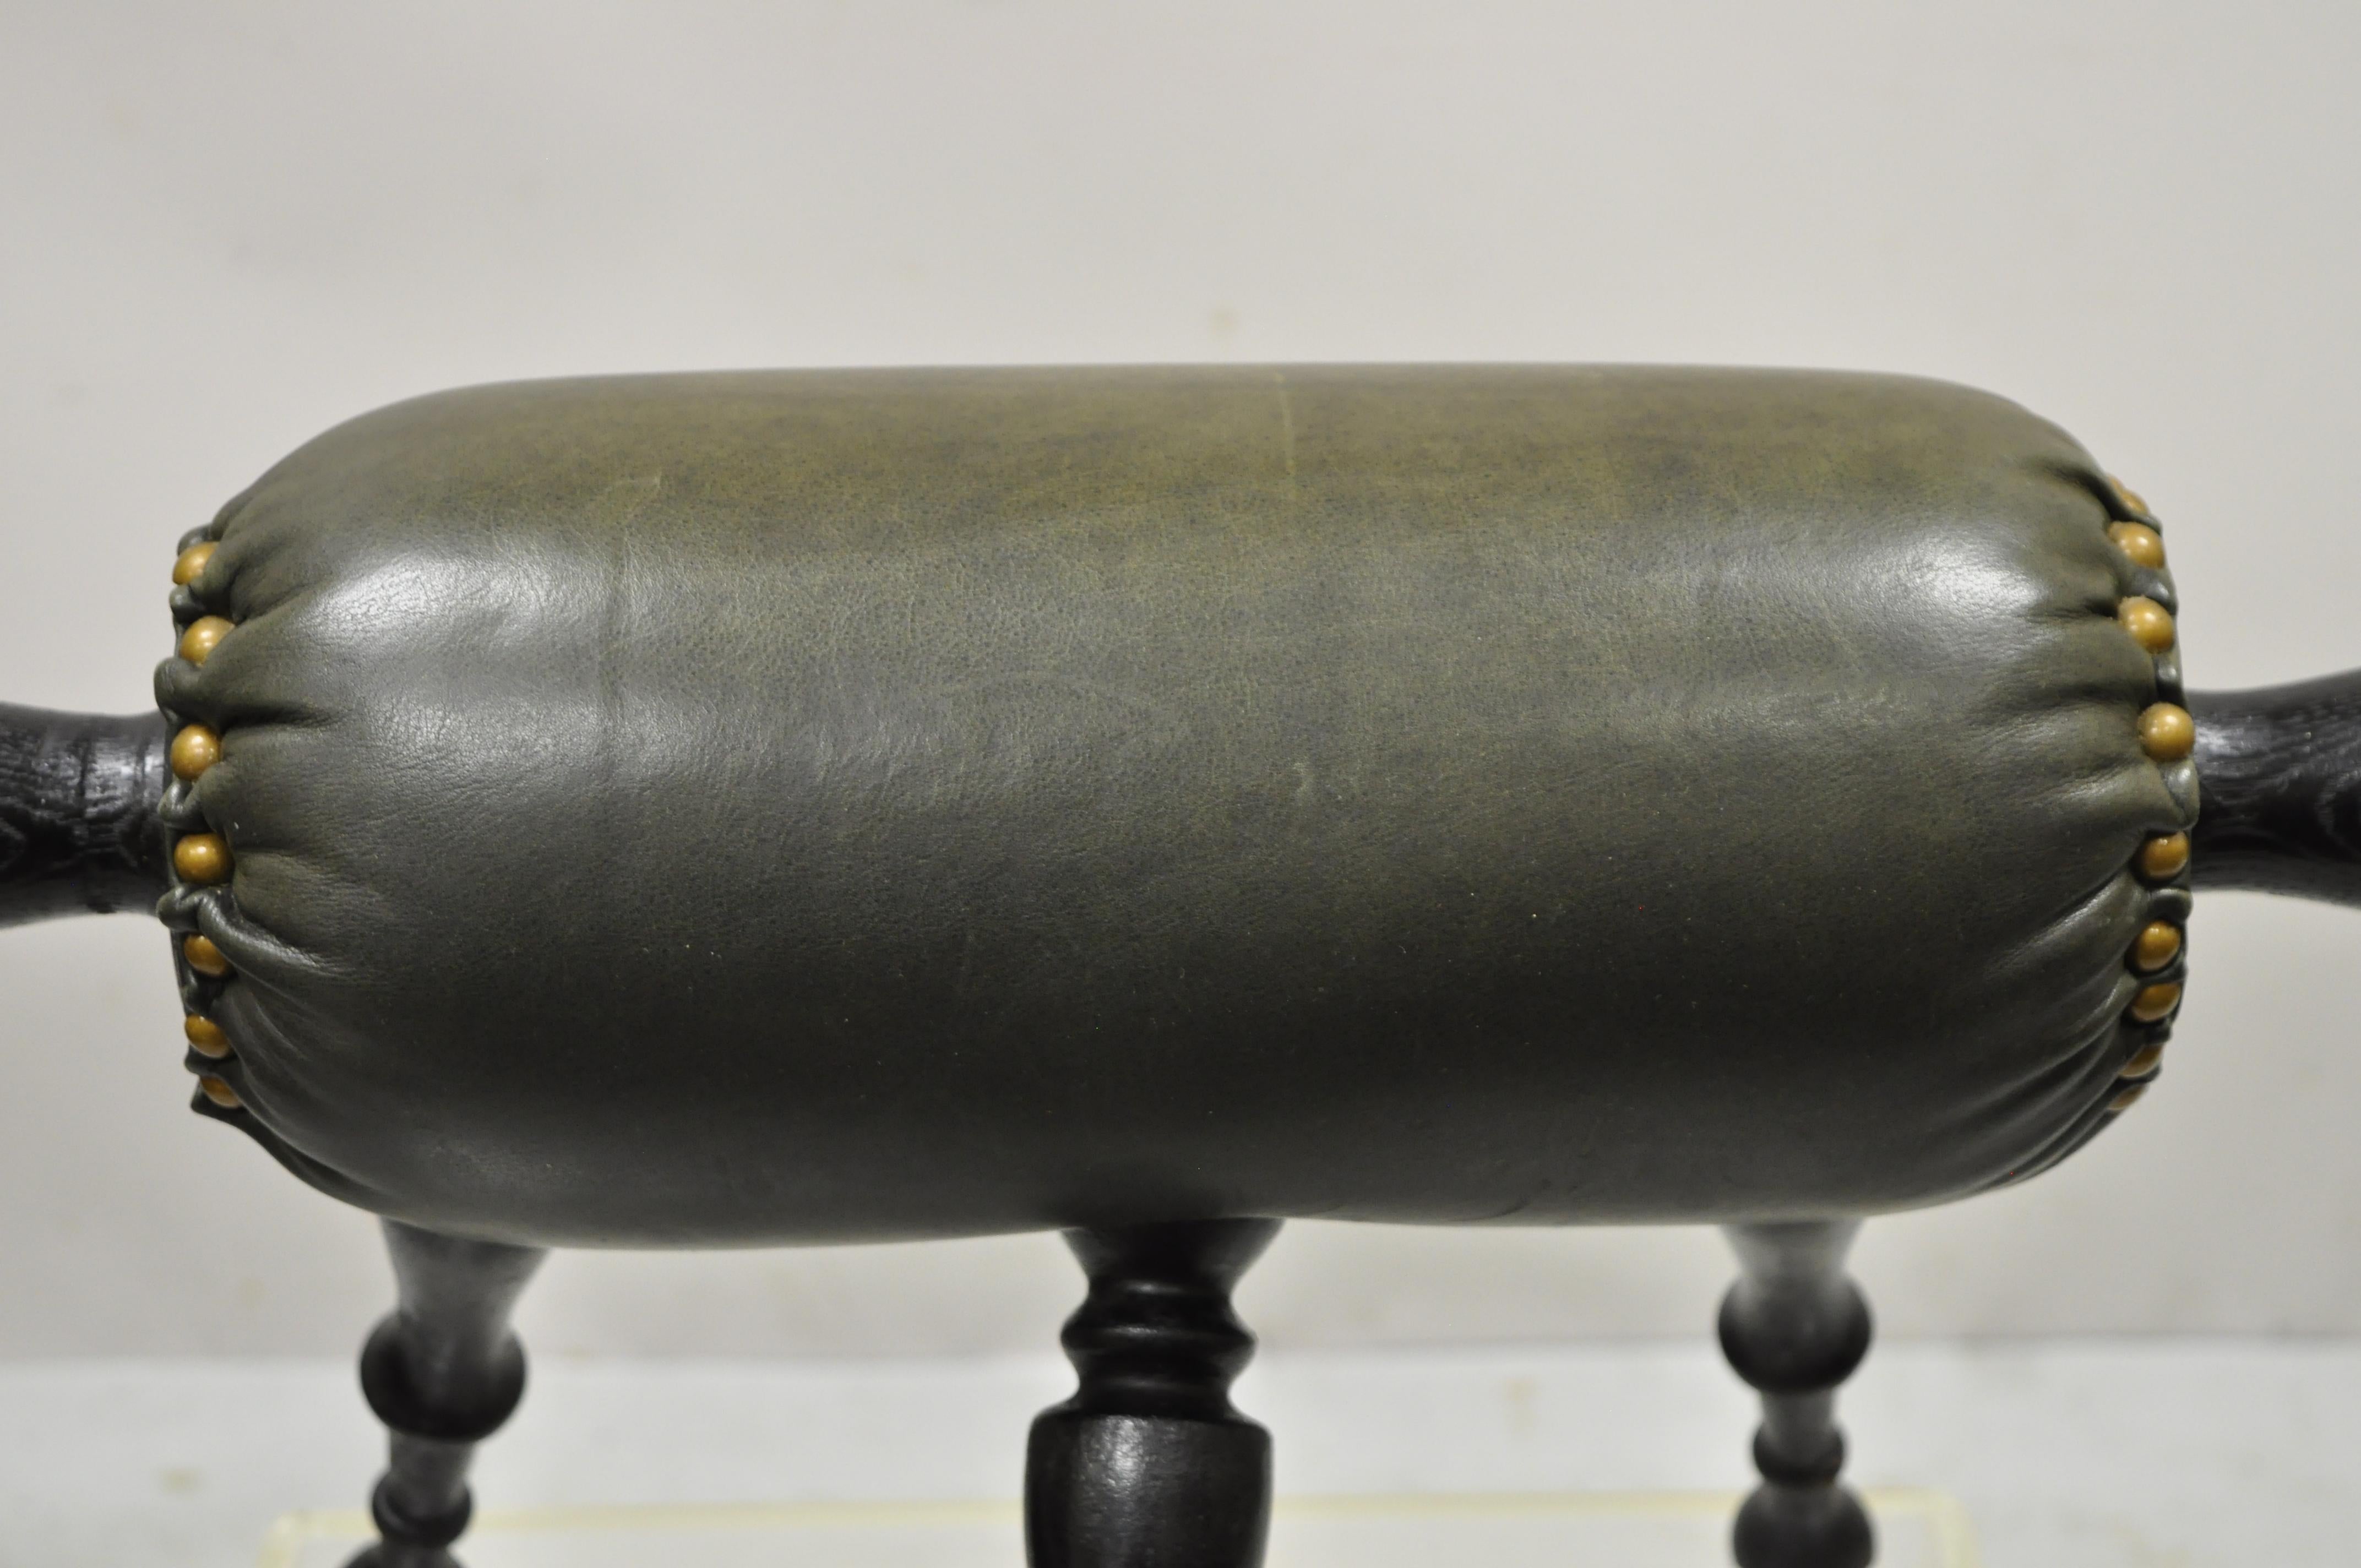 Antique carved wood green leather Victorian 19th century Gout Stool Footstool. Item features solid wood construction, nicely carved details, very nice antique item, quality American craftsmanship. Circa 19th century. Measurements: 13.5